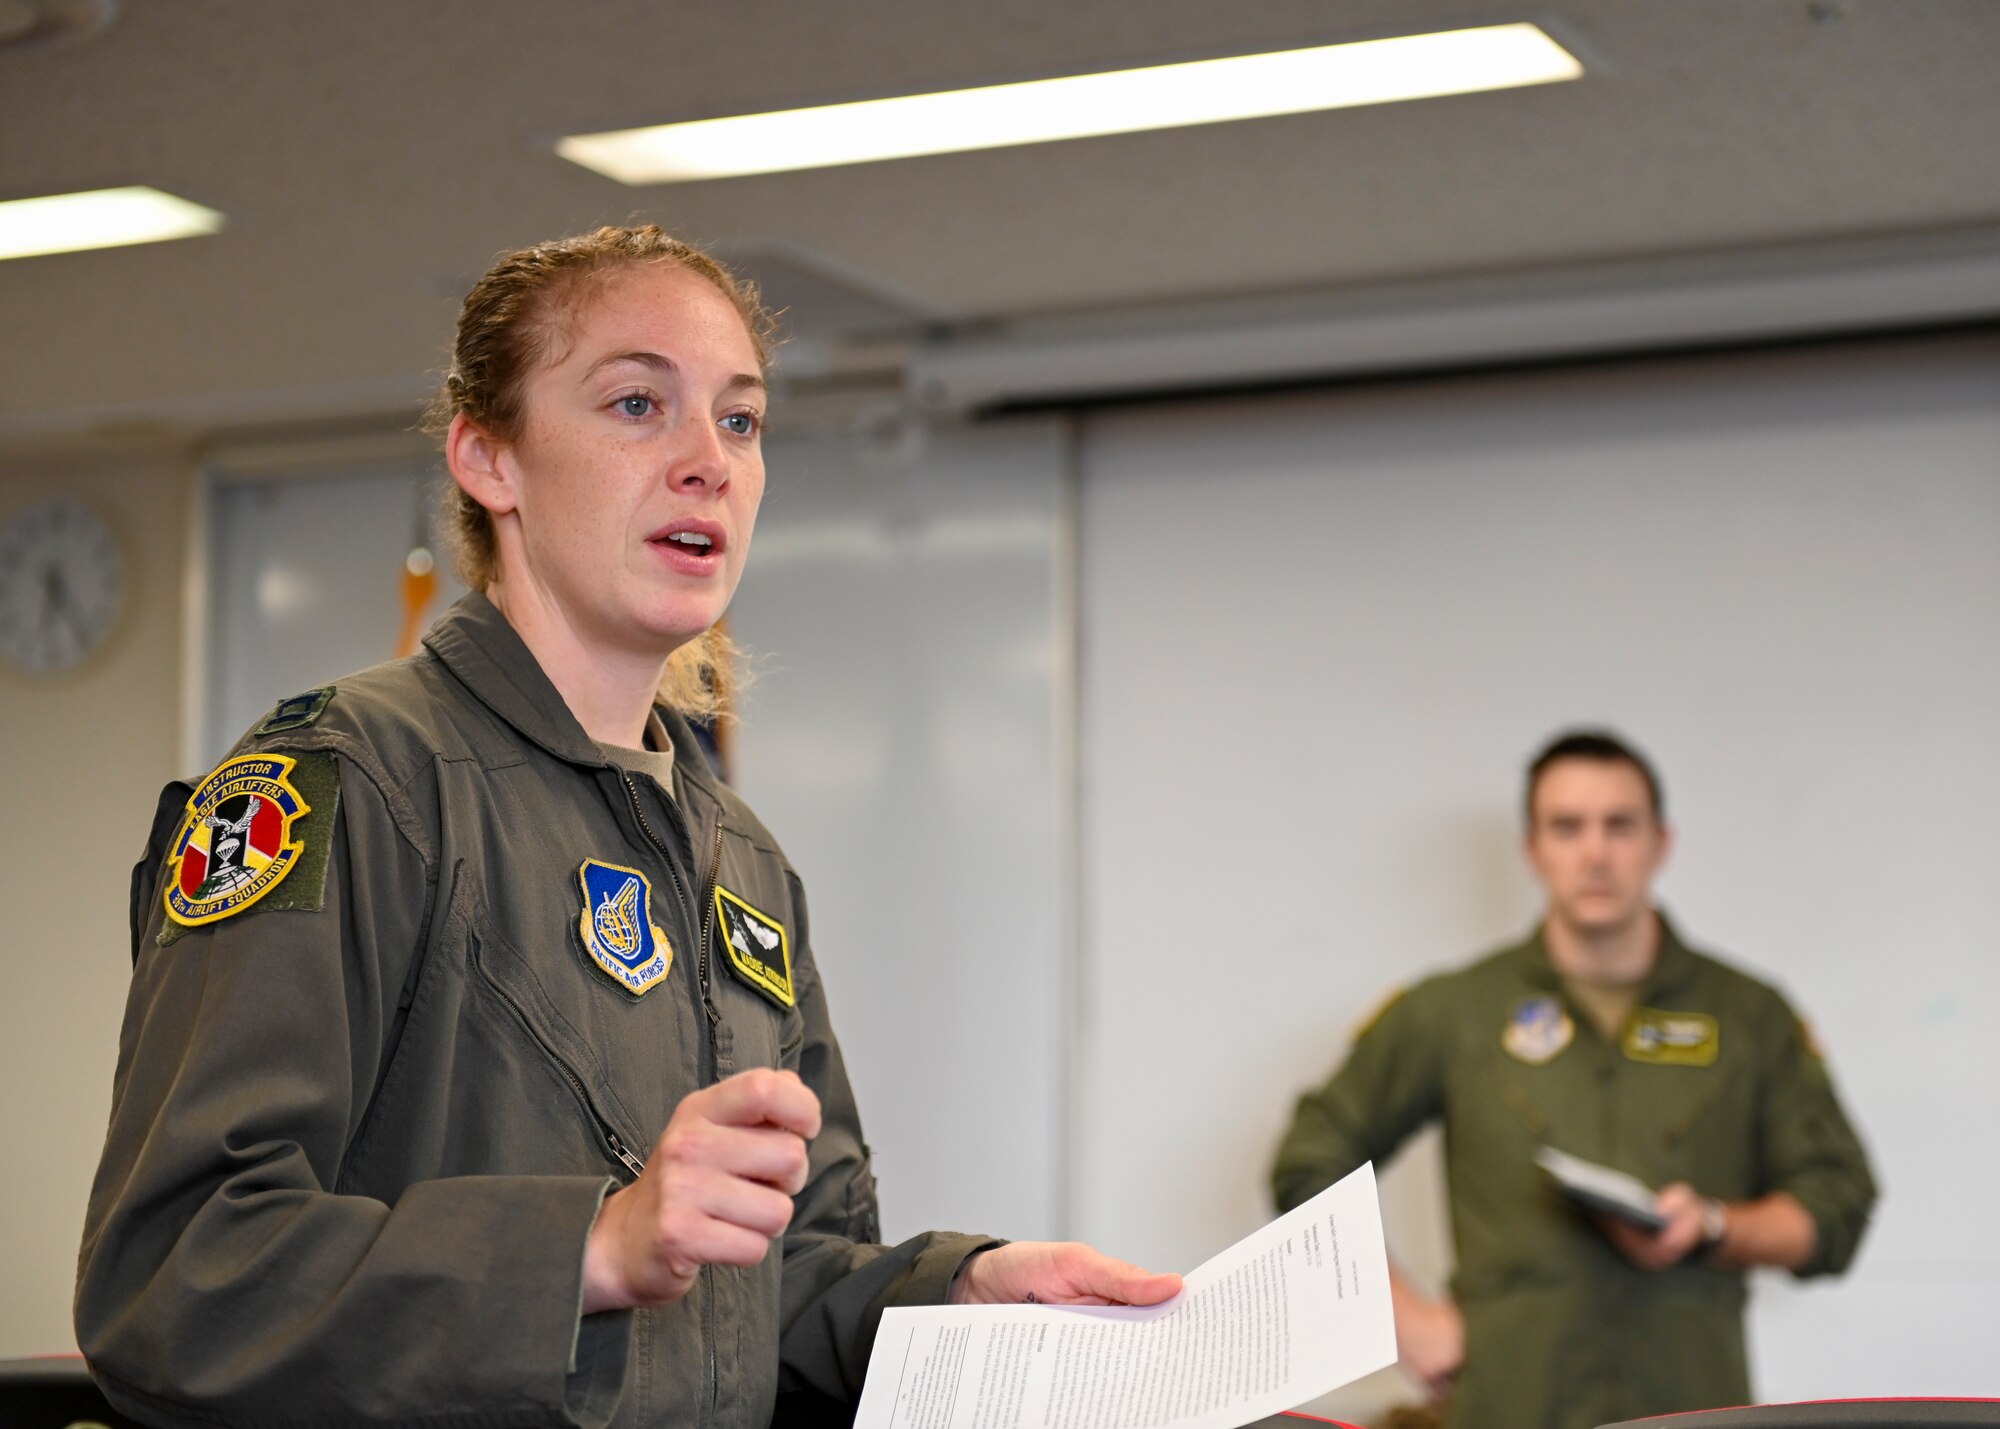 A female pilot speaks to a meeting in a conference room